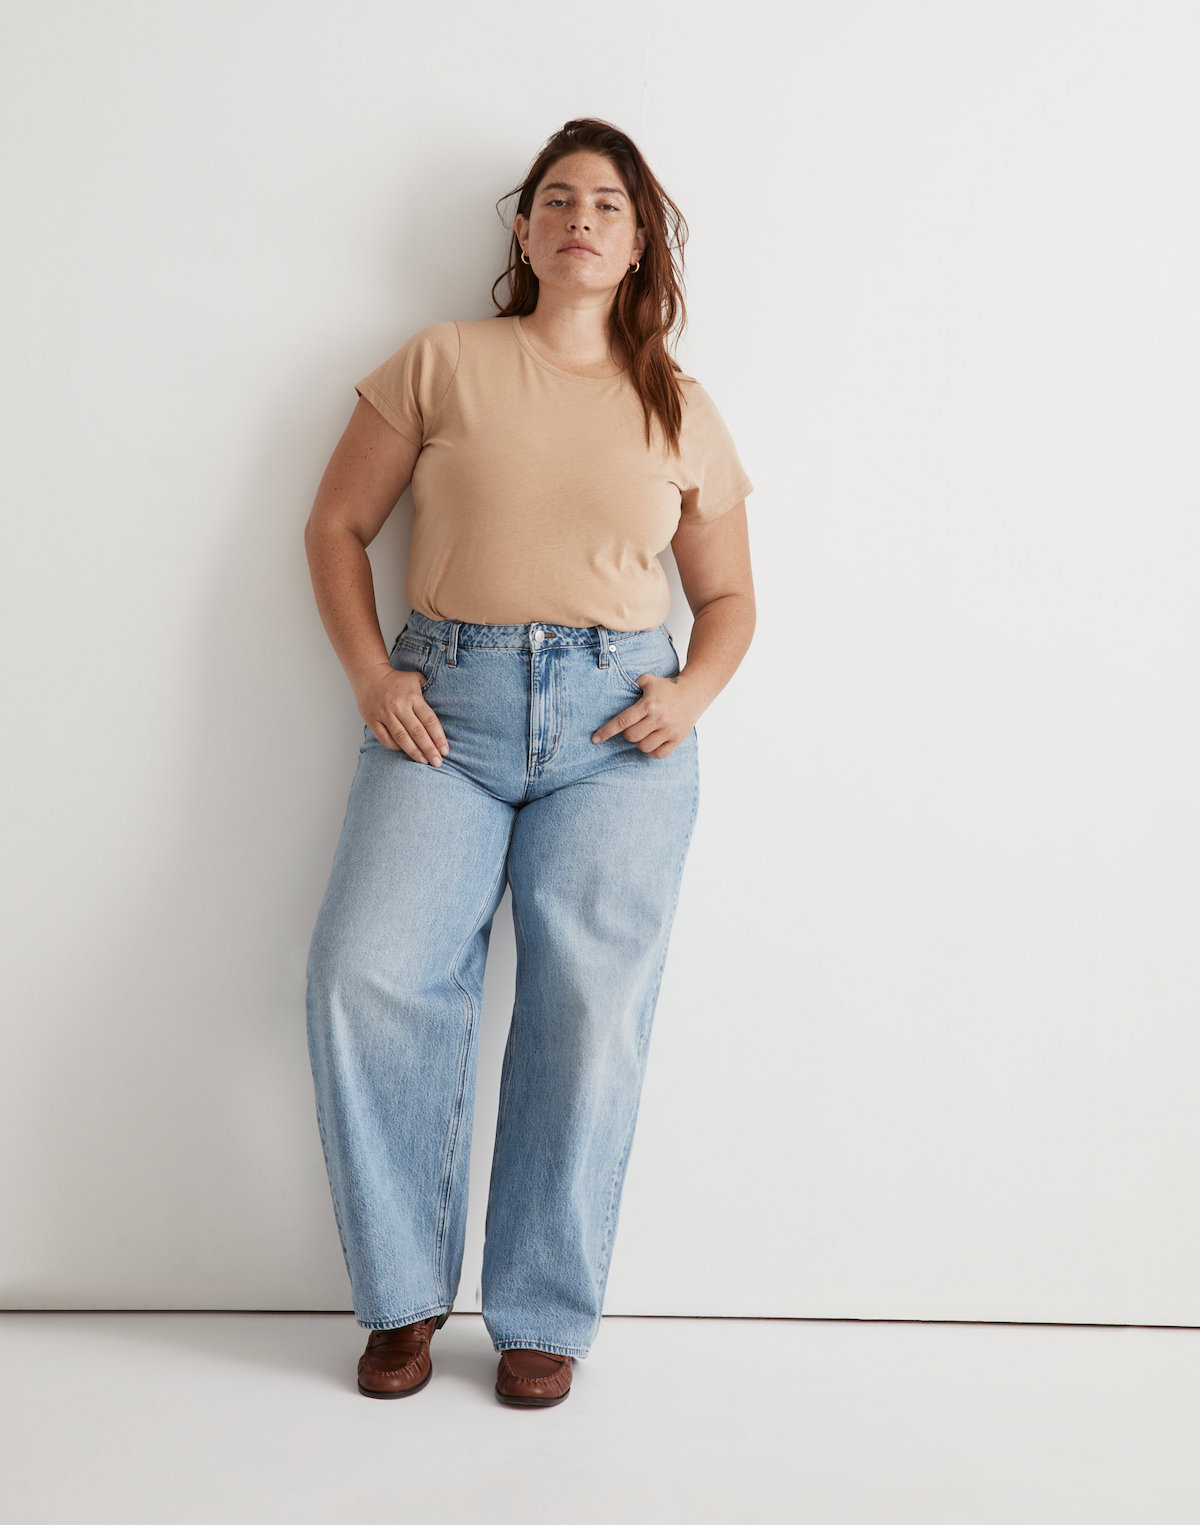 <p>If you look at a list of the "best jeans," you're likely to find <a rel="nofollow noopener noreferrer external" href="https://www.madewell.com/">Madewell</a>, known for their flattering fits, high-quality construction, and range of trendy styles.</p><p>"Madewell is great for casual and everyday clothing from denim to dresses," says Wendler. "You will find timeless and easy essentials for work and weekend lifestyles."</p><p>Their plus sizes range from 14 to 28 in bottoms and dresses, and 1X to 4X in tops.</p><p>"And at a price range from $80 to $130, they are on the moderate to high end for a quality pair of jeans," notes Forscutt. Even better, their denim <a rel="nofollow noopener noreferrer external" href="https://madewellforever.thredup.com/pages/tradein">trade-in program</a> allows you to bring in a pair of used jeans (even if they're not from Madewell) and receive $20 off a new pair.</p>